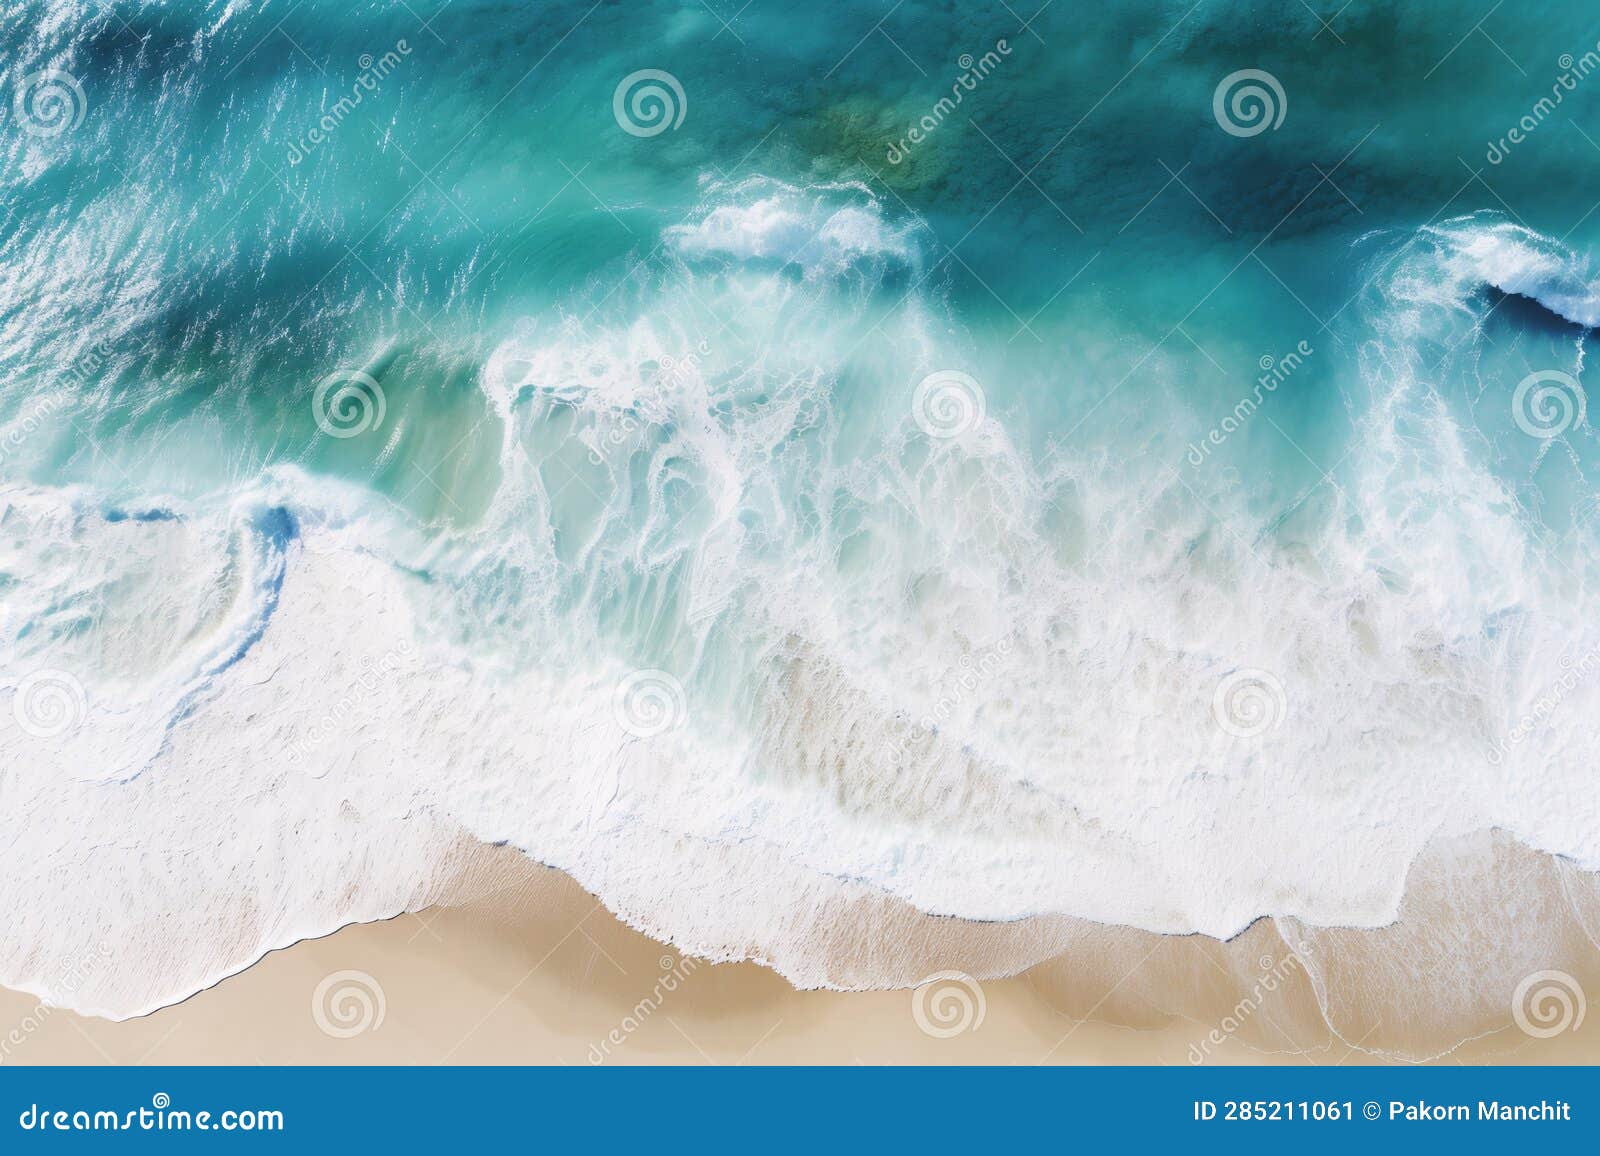 a blue water wave in the beach, in the style of teal and beige, spectacular backdrops